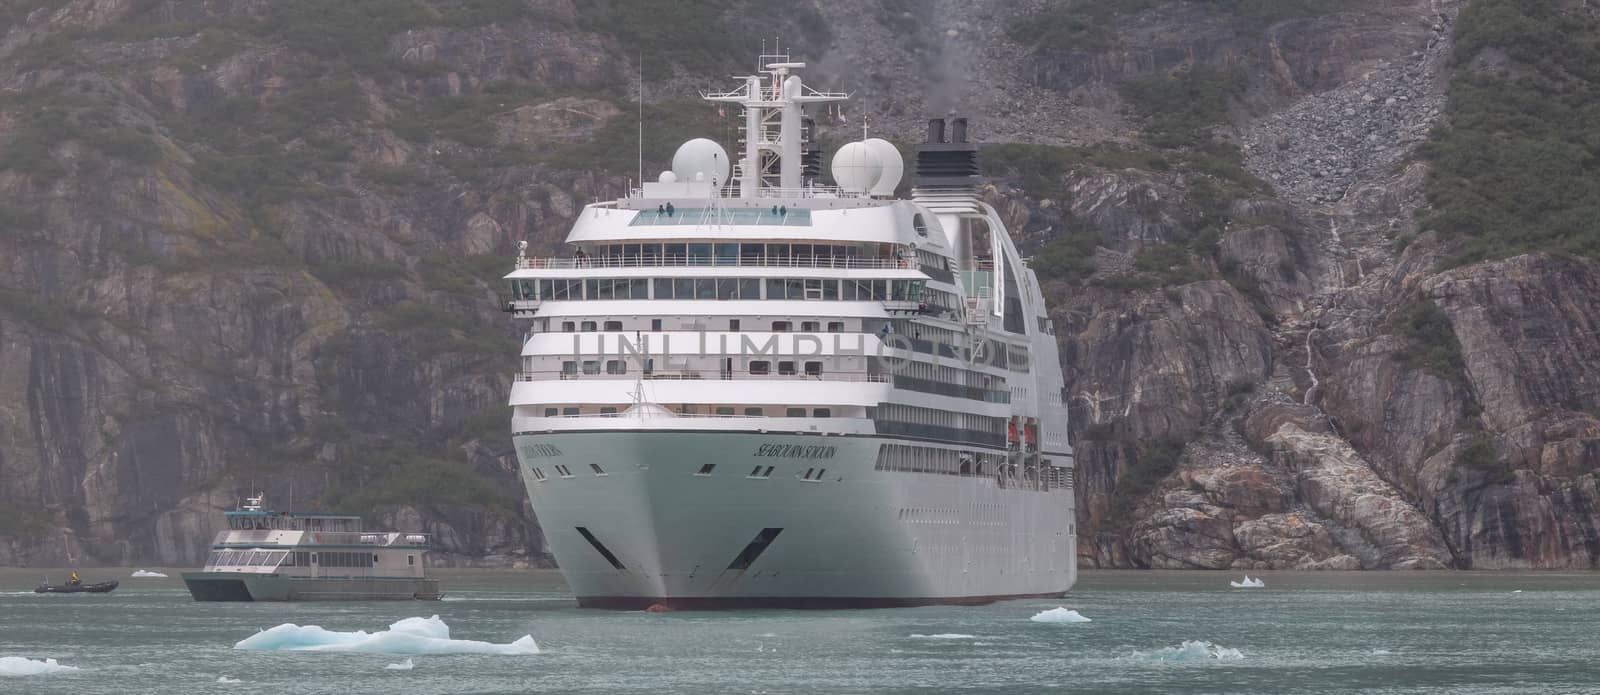 Seabourn Sojourn drifting in Tracy Arm Fjord by DamantisZ